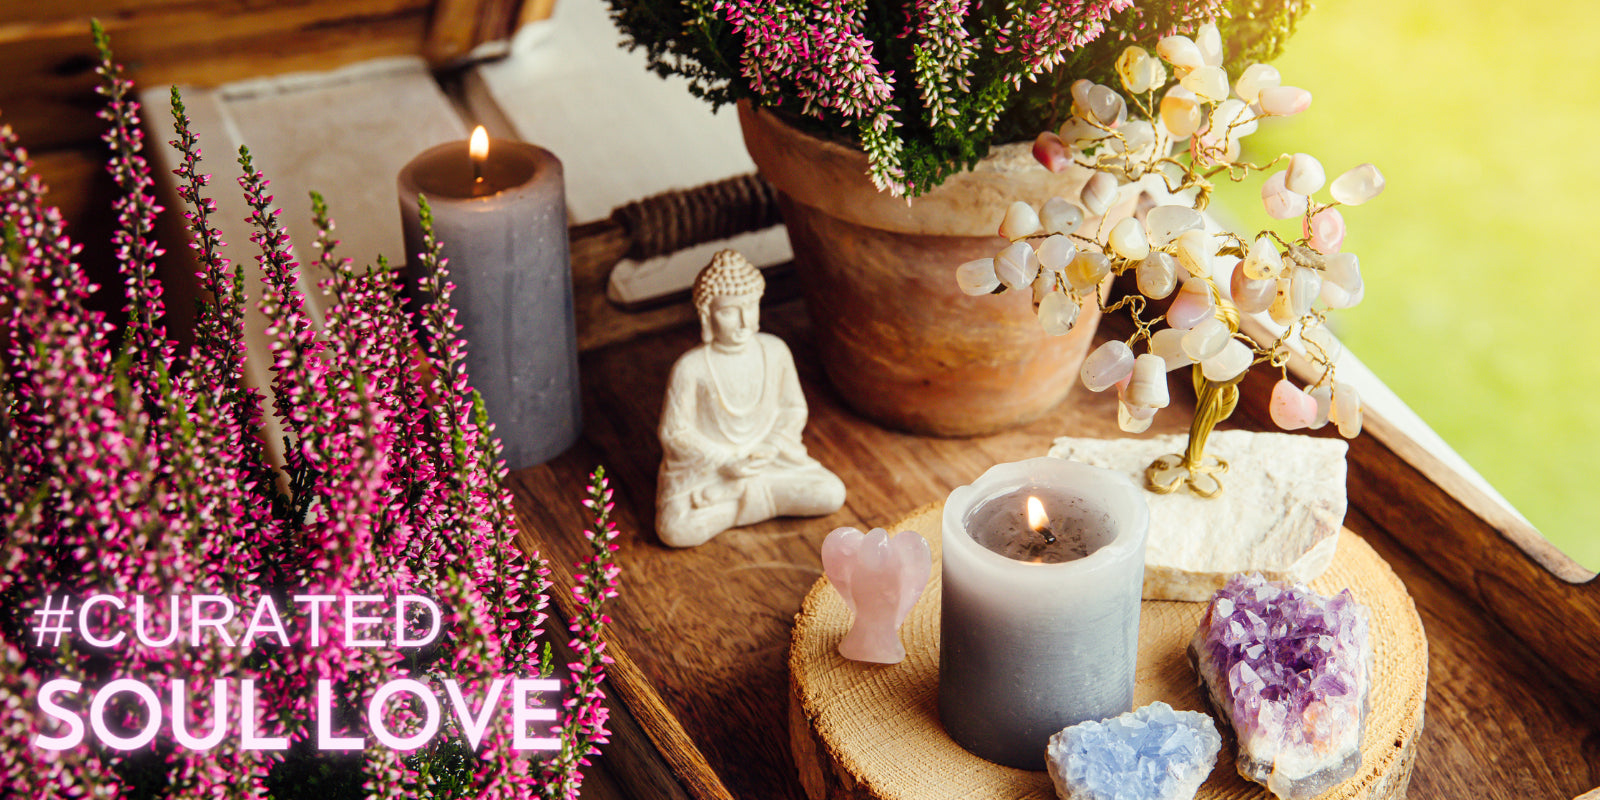 Soul love - items for the spiritual